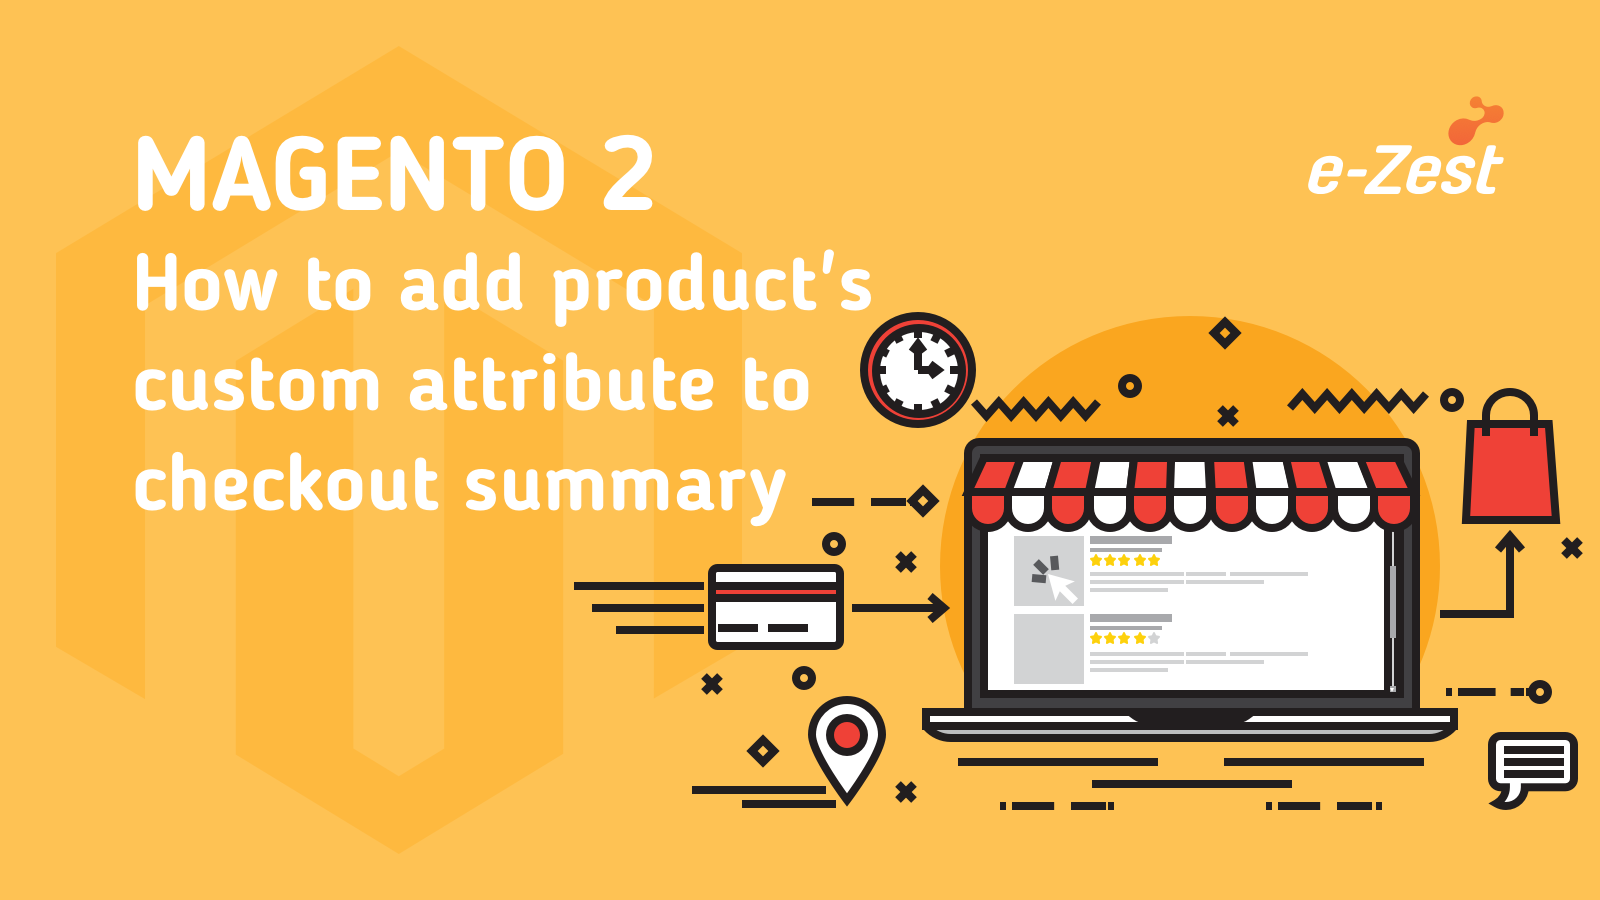 Magento 2 - How to add product's custom attribute to checkout summary